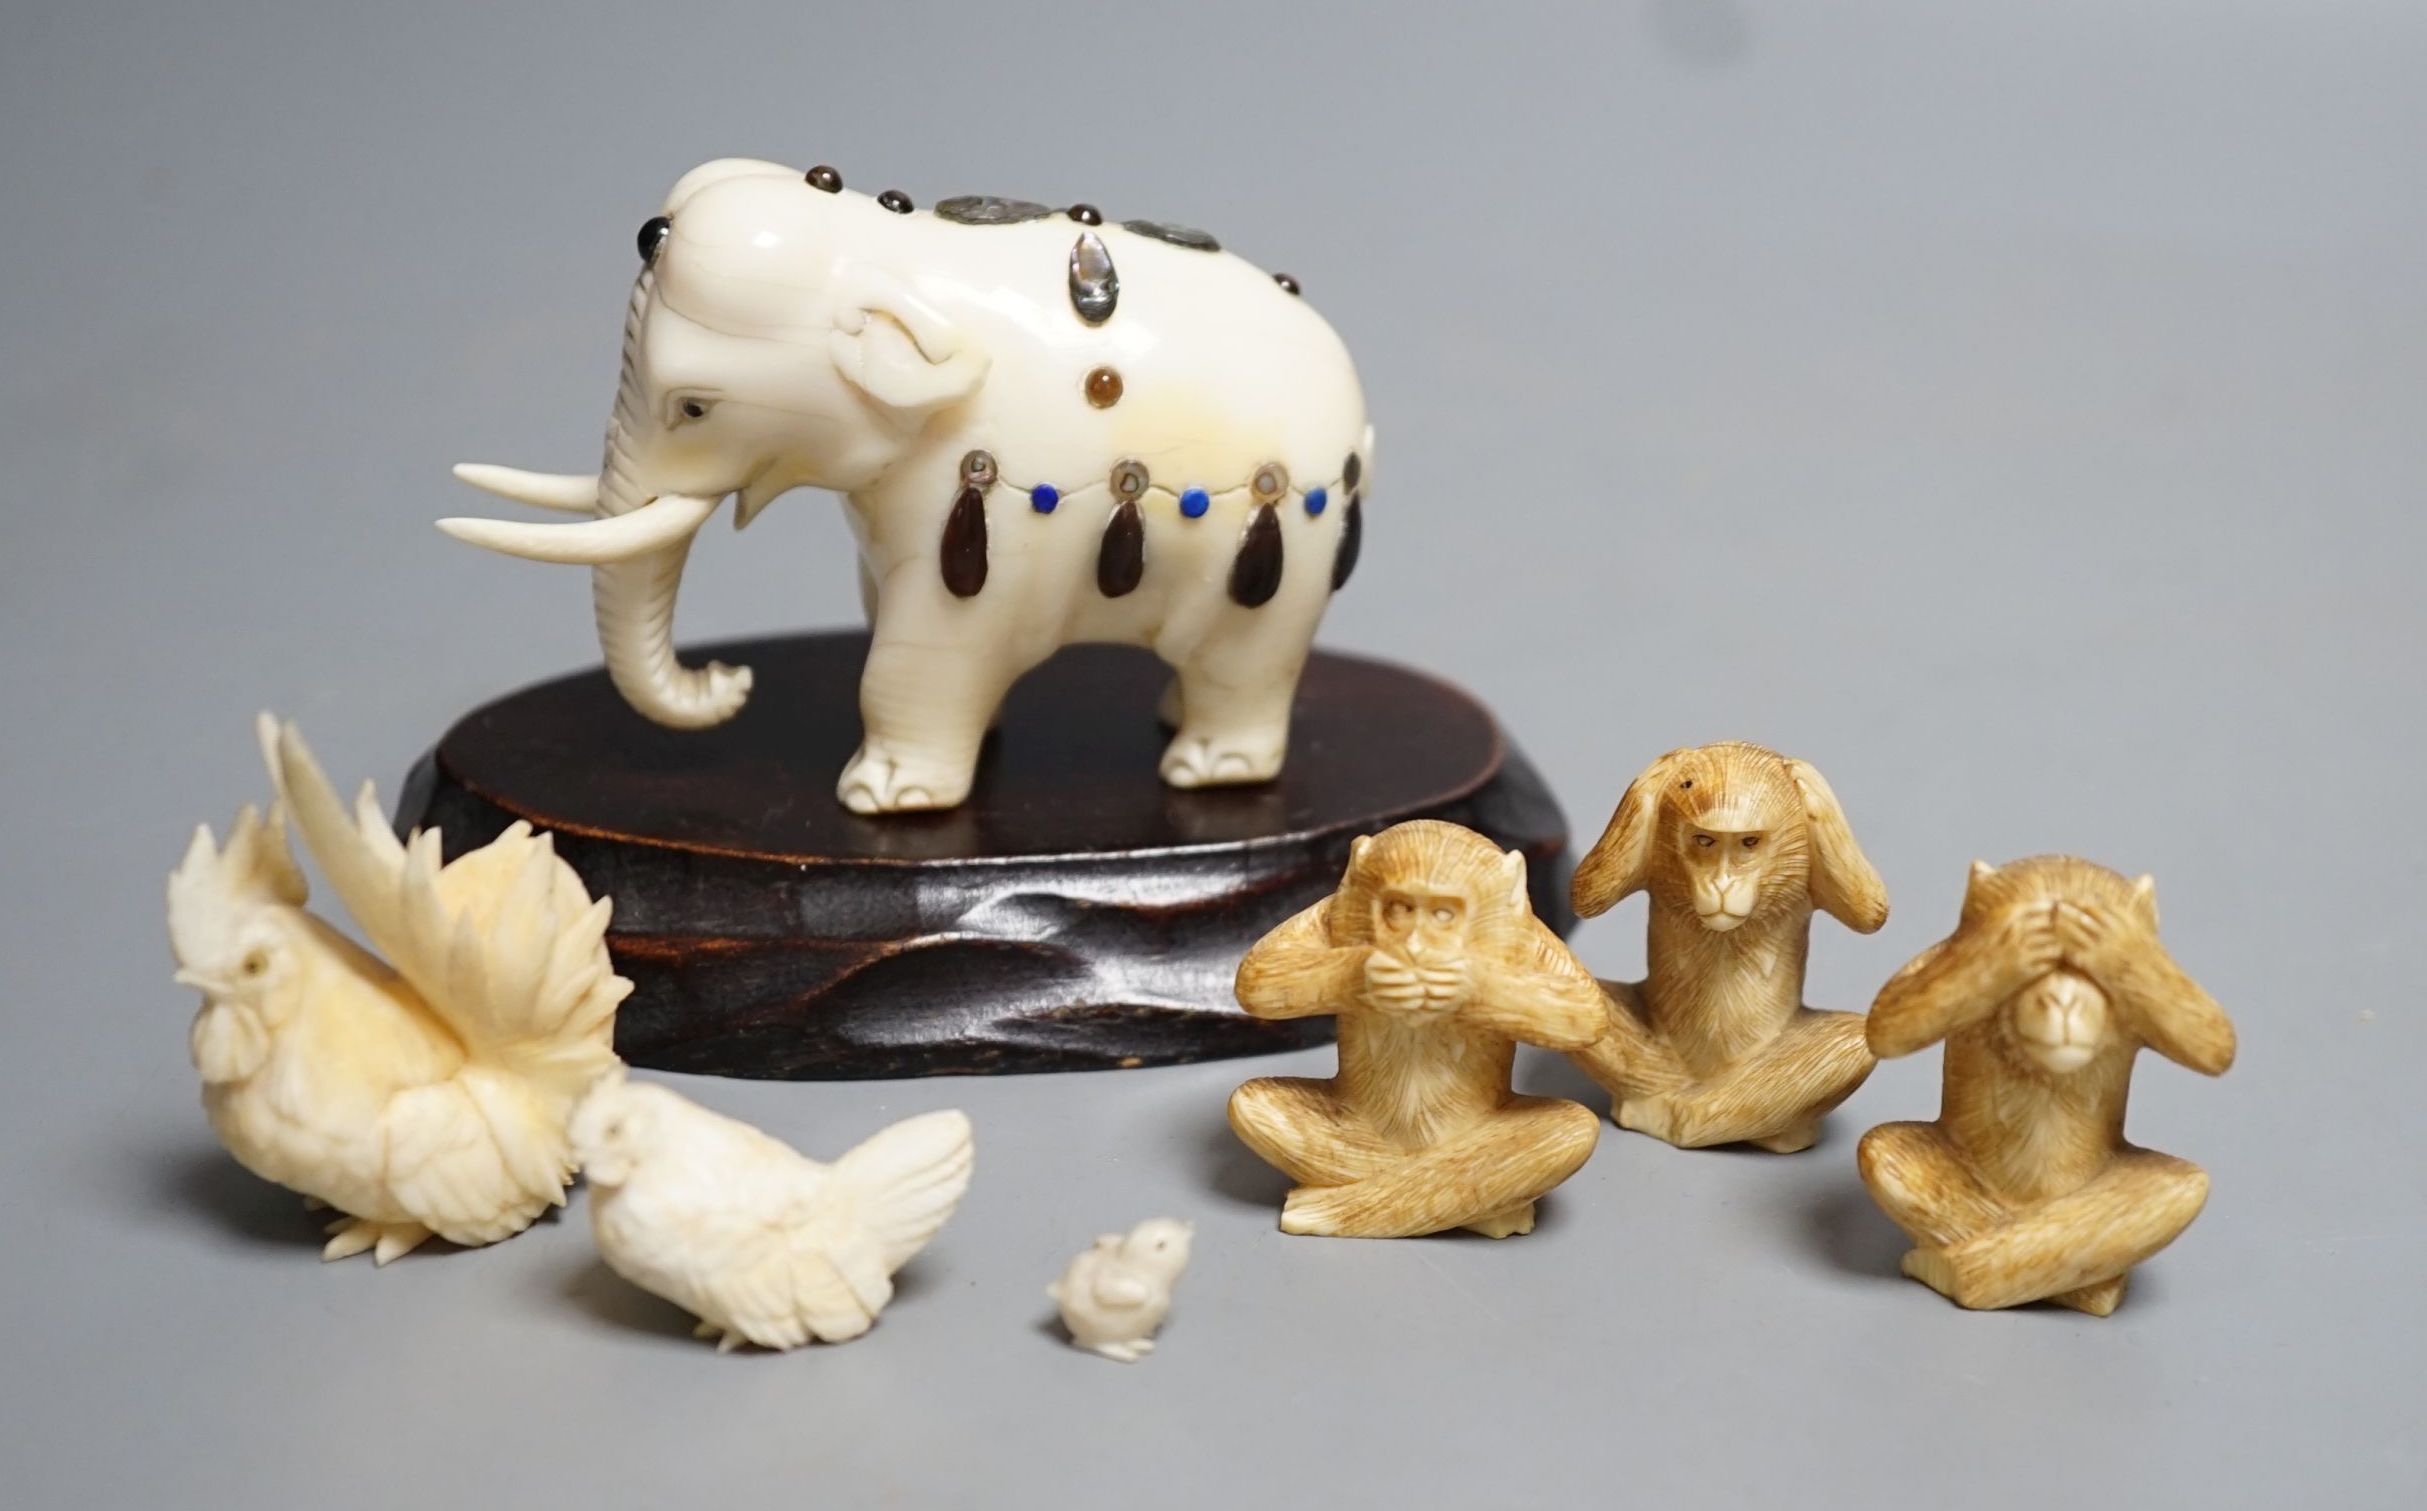 A Japanese Ivory and Shibayama style model of an elephant, three Japanese Ivory figures of the three wise monkeys and three Japanese ivory models of chickens and a chick, wood stand, all late 19th/early 20th century